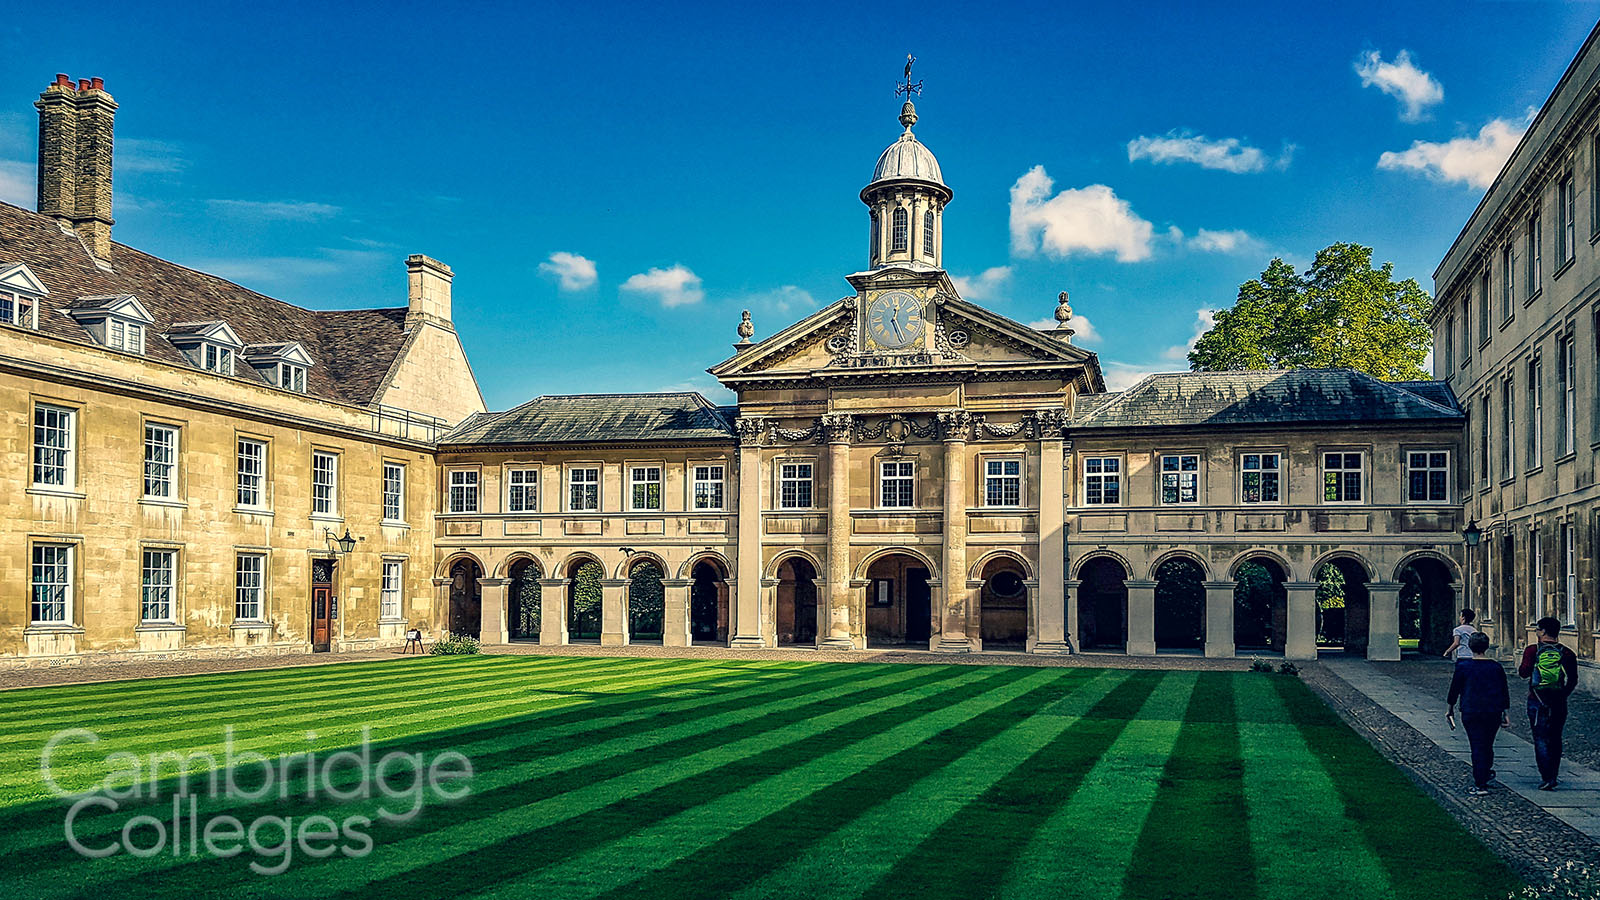 Christopher Wren's chapel at Emmanuel college, as seen from Front court